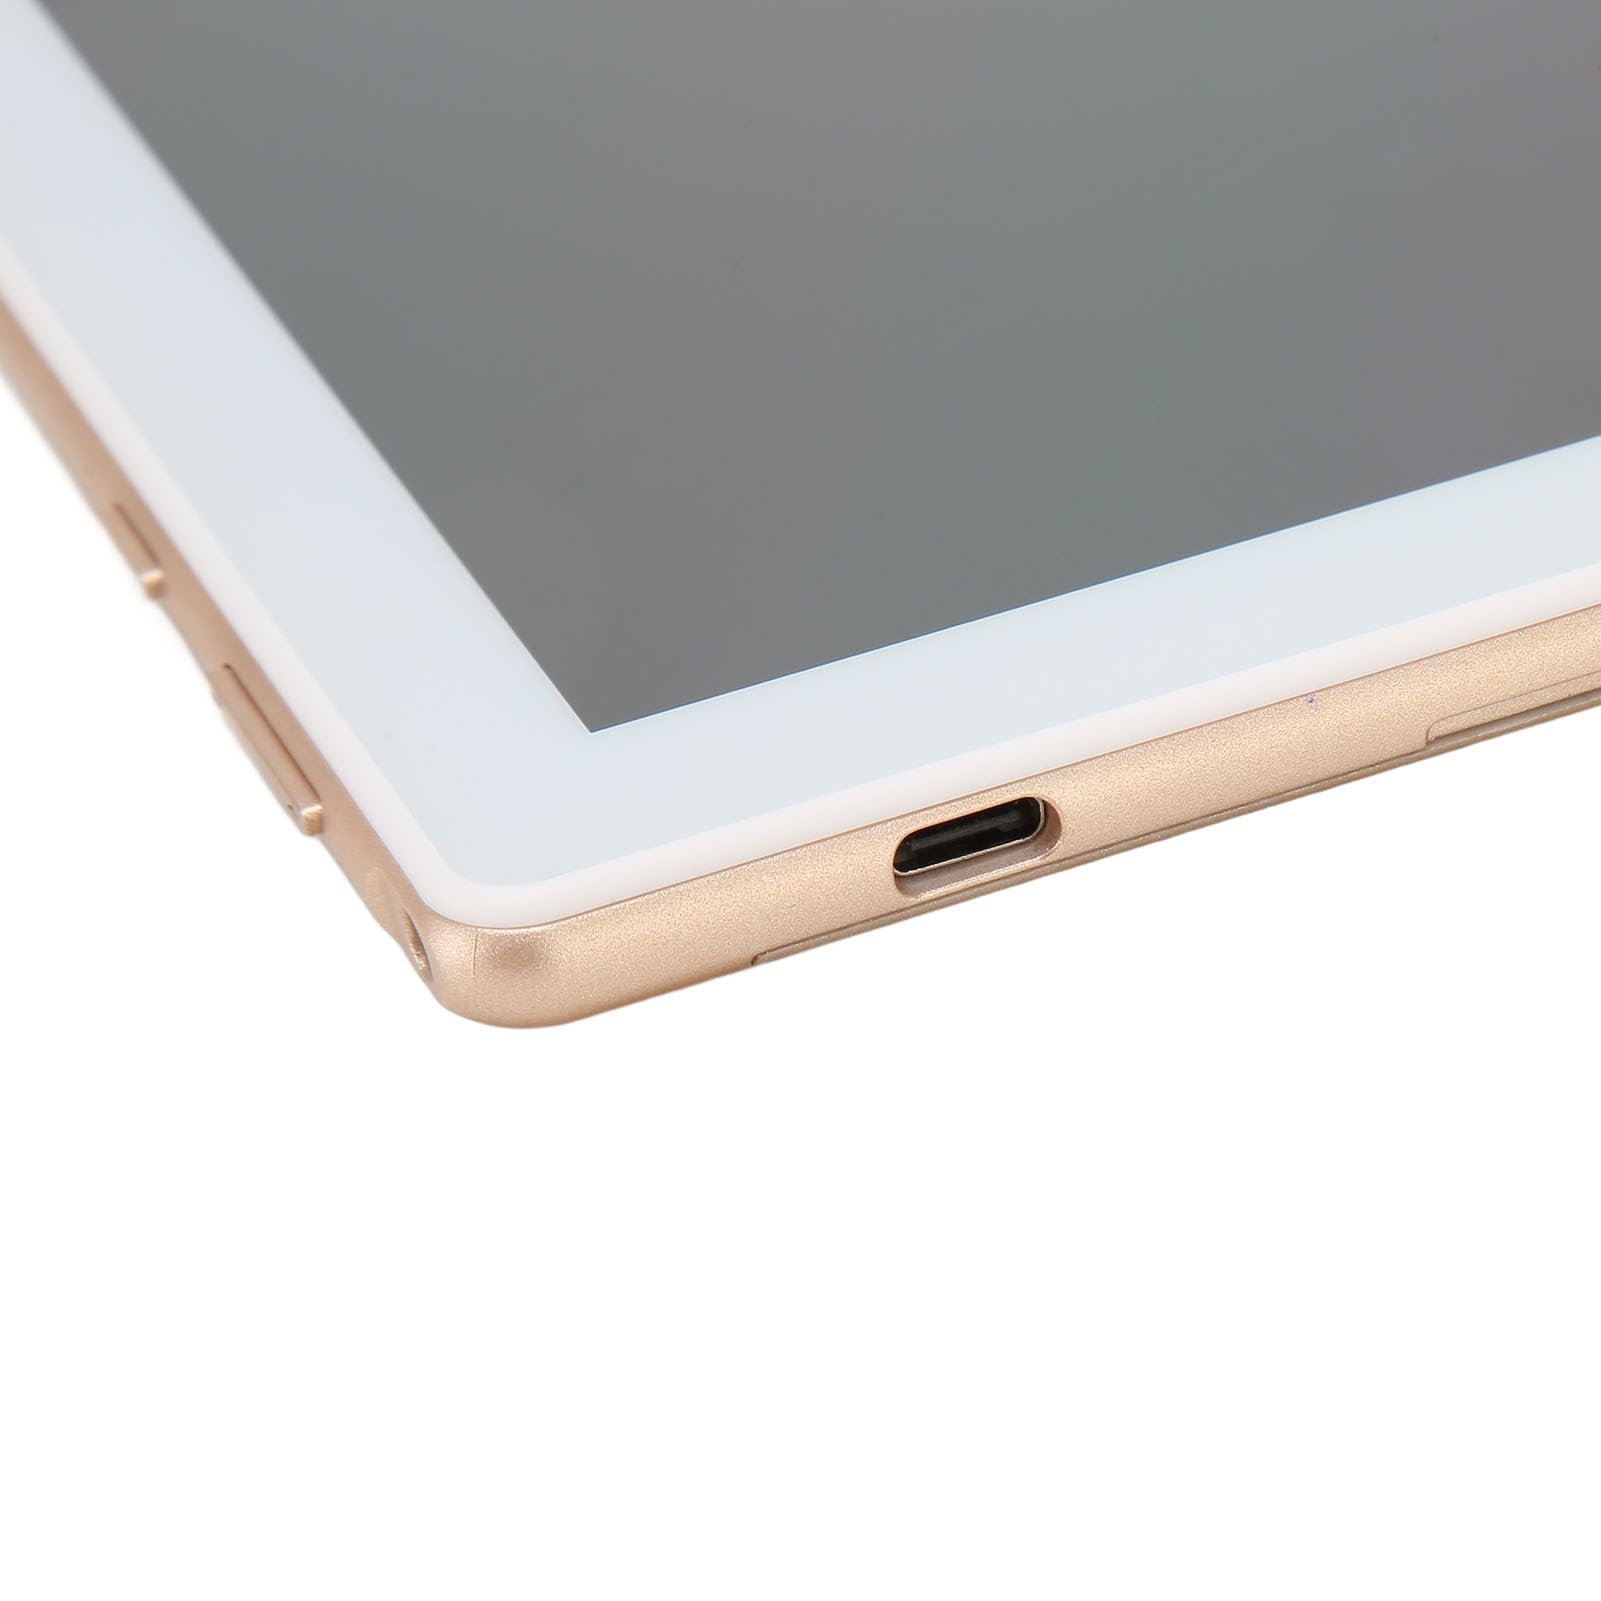 jerss Office Tablet, Octa Core CPU US Plug 100‑240V HD Tablet Dual Camera for Travel (Gold)